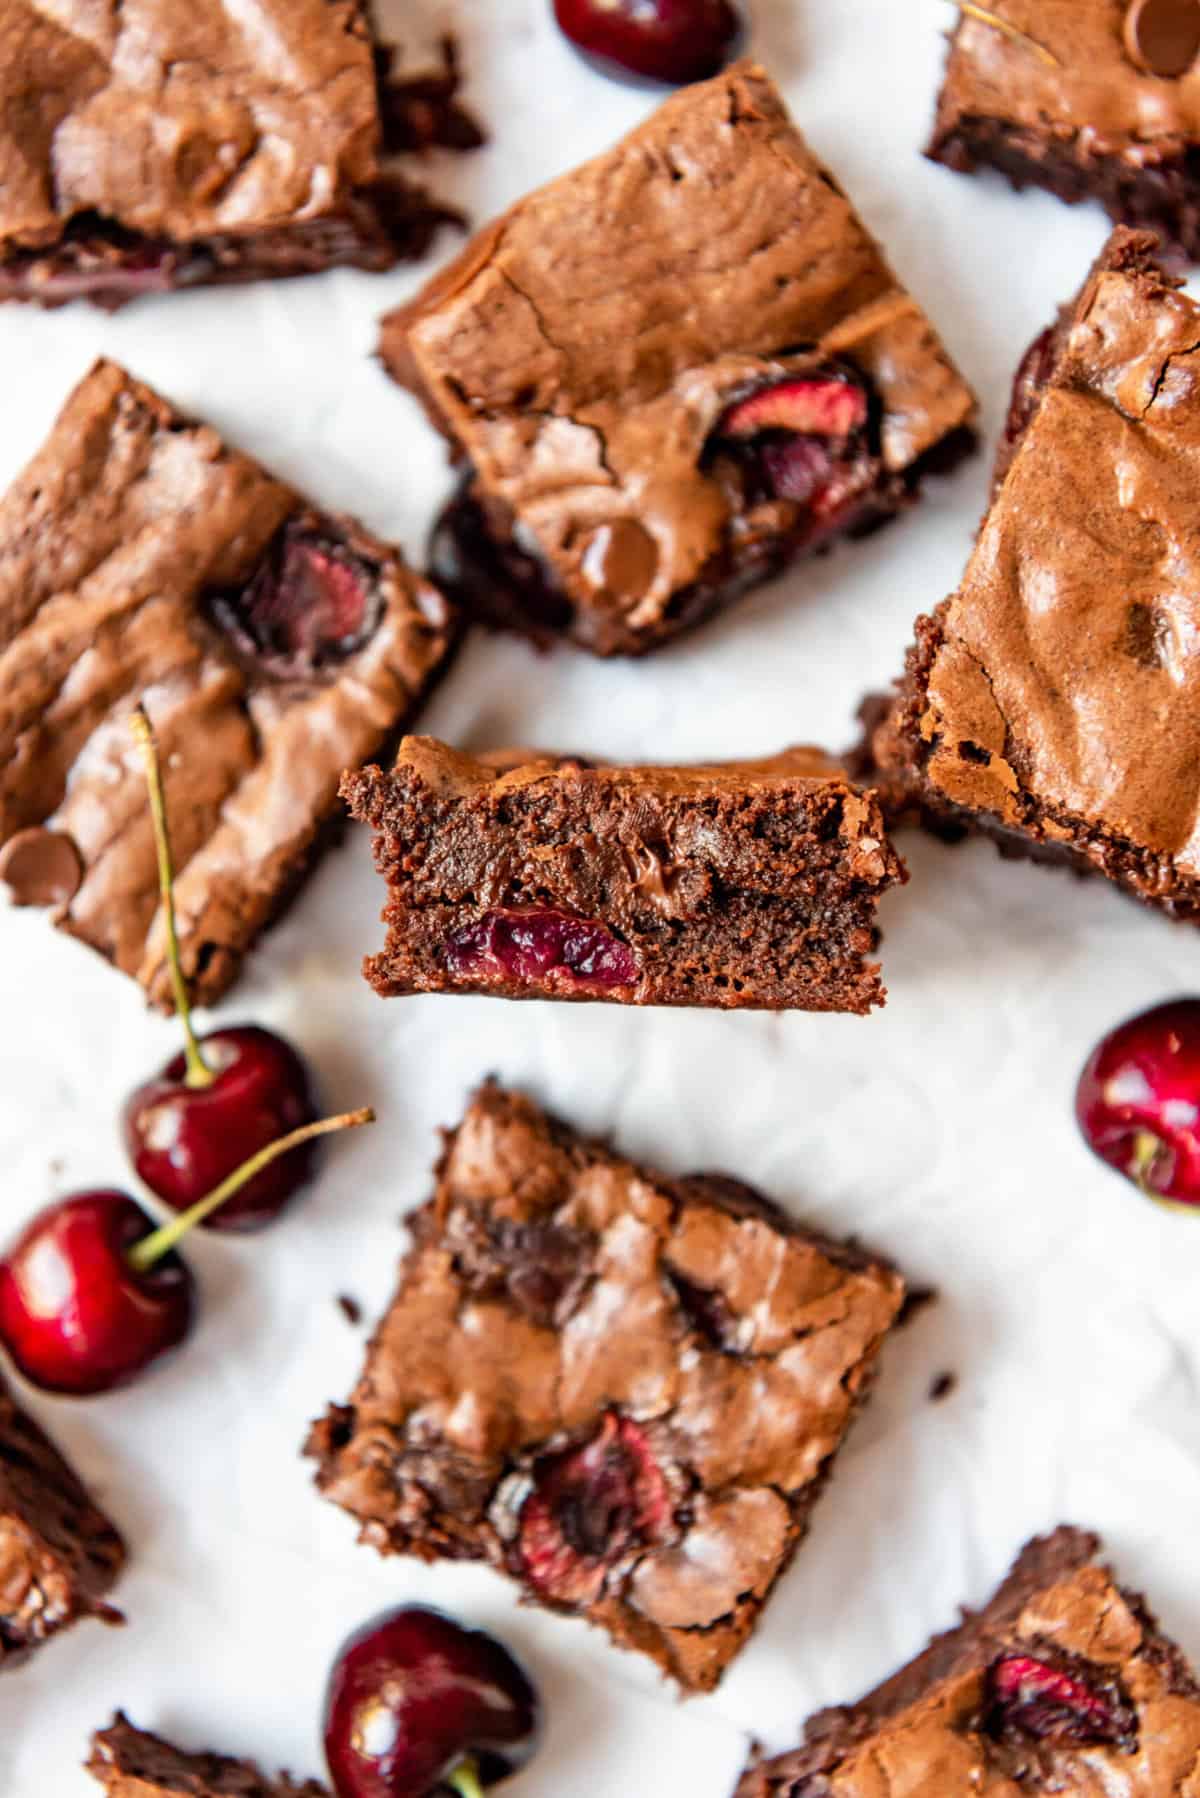 A cherry brownie turned on its side to show the fudge middle studded with cherries and chocolate chips.